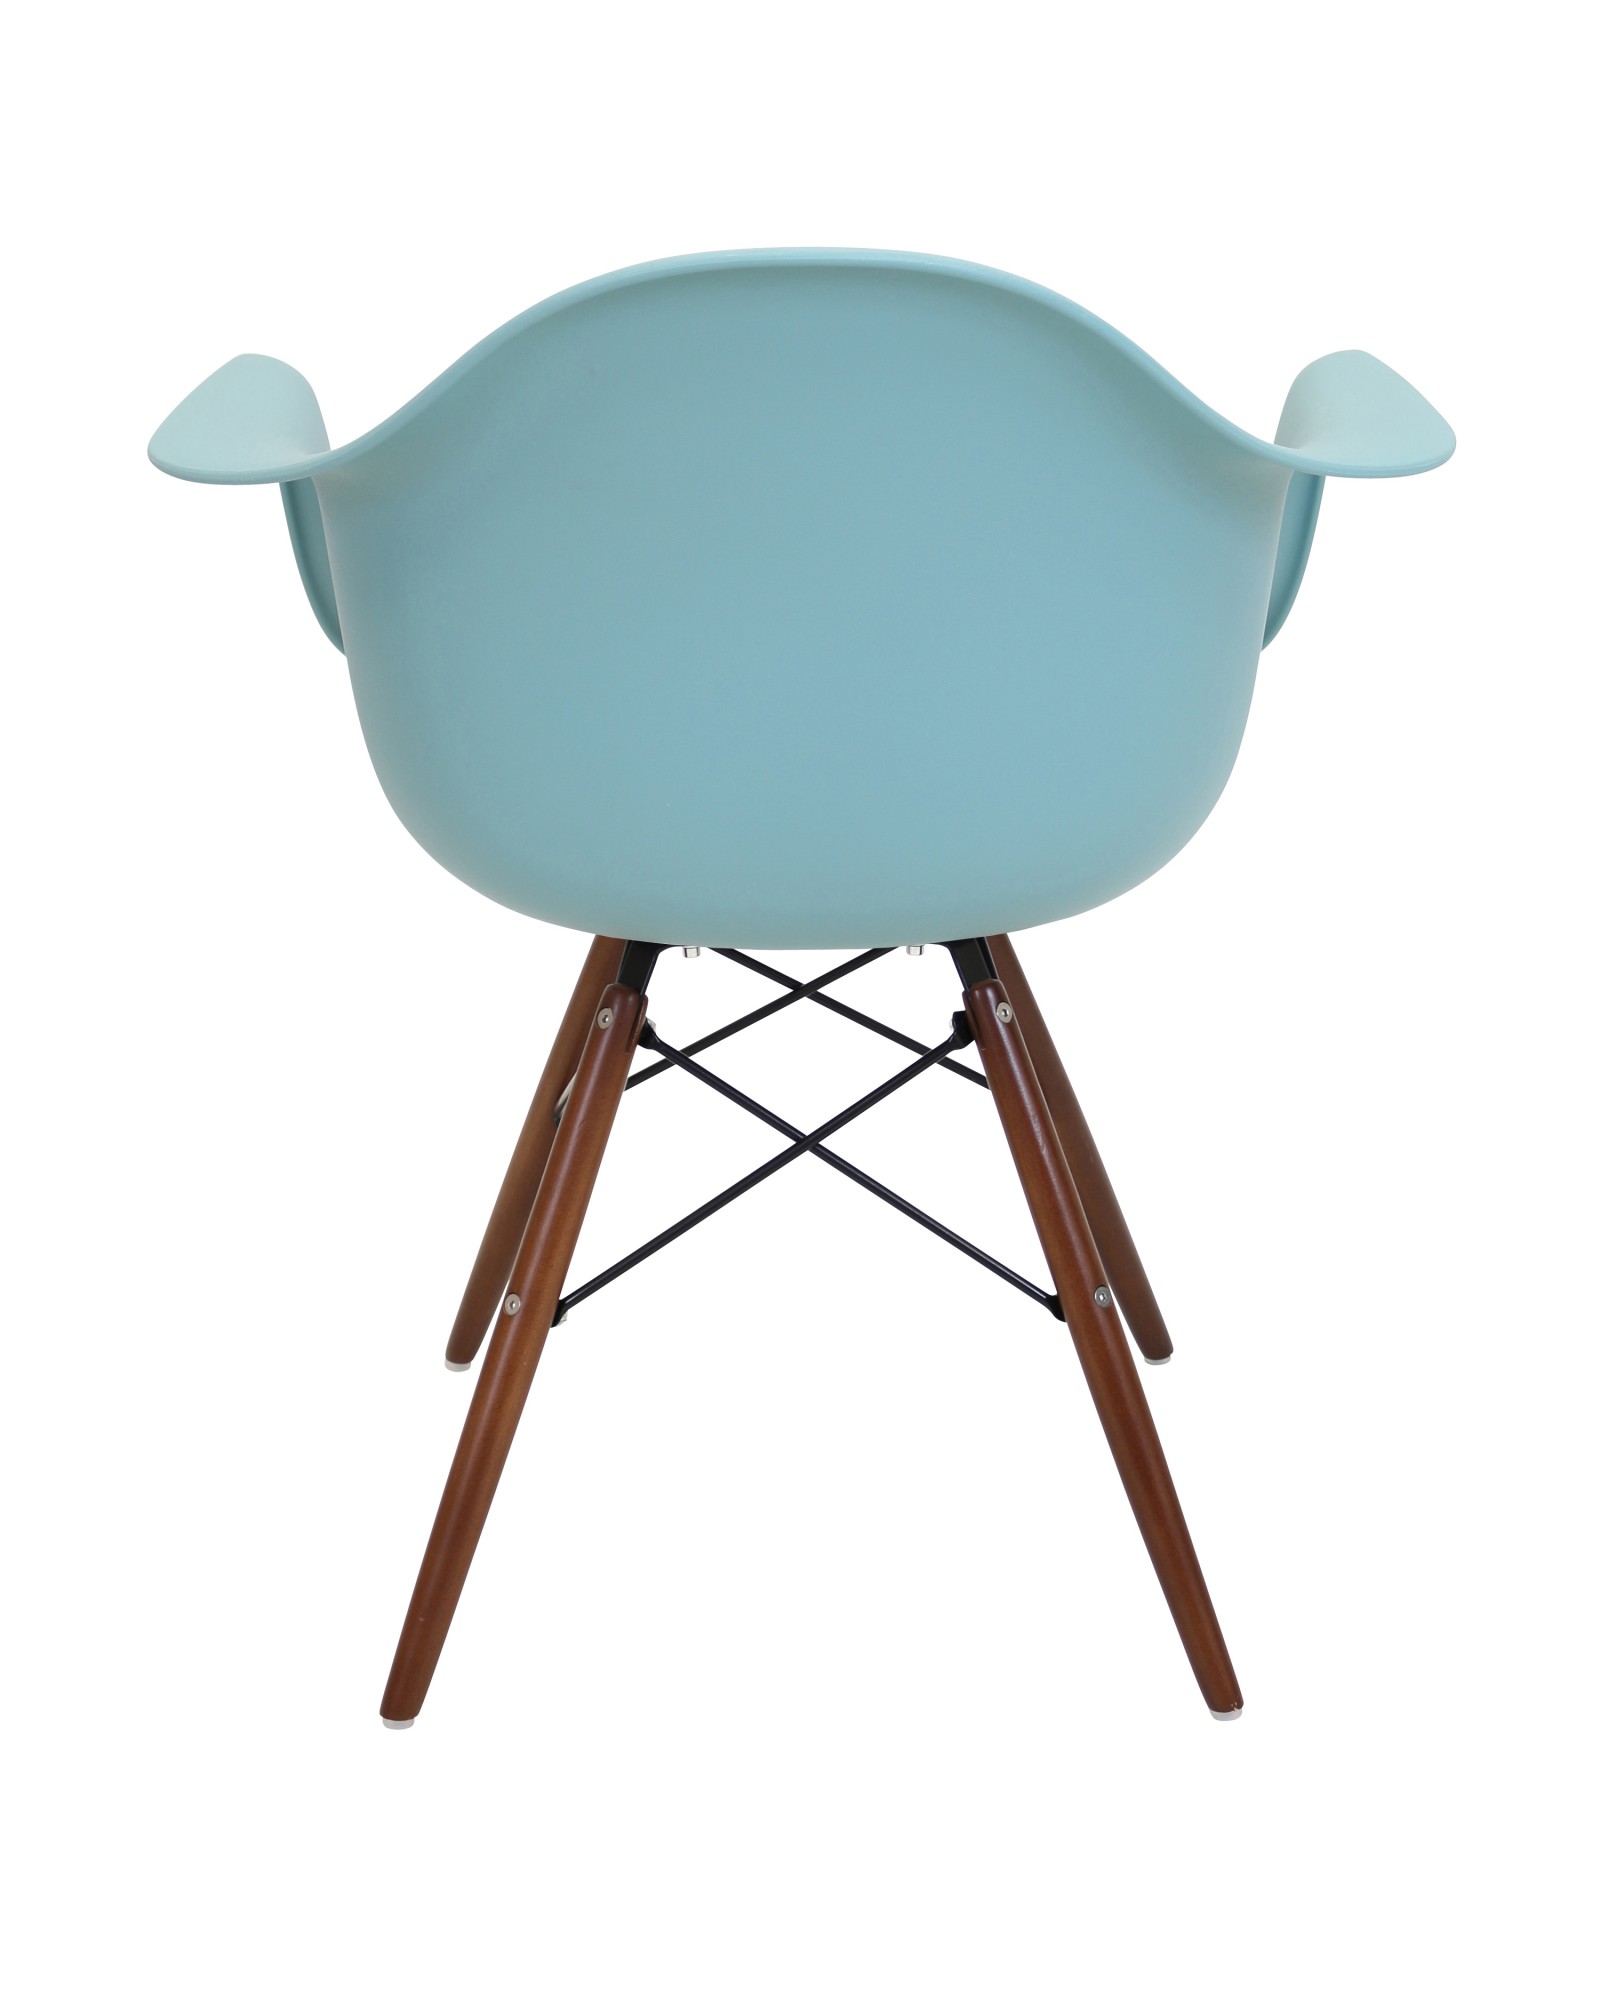 Neo Flair Mid-Century Modern Chair in Sea Green and Espresso - Set of 2